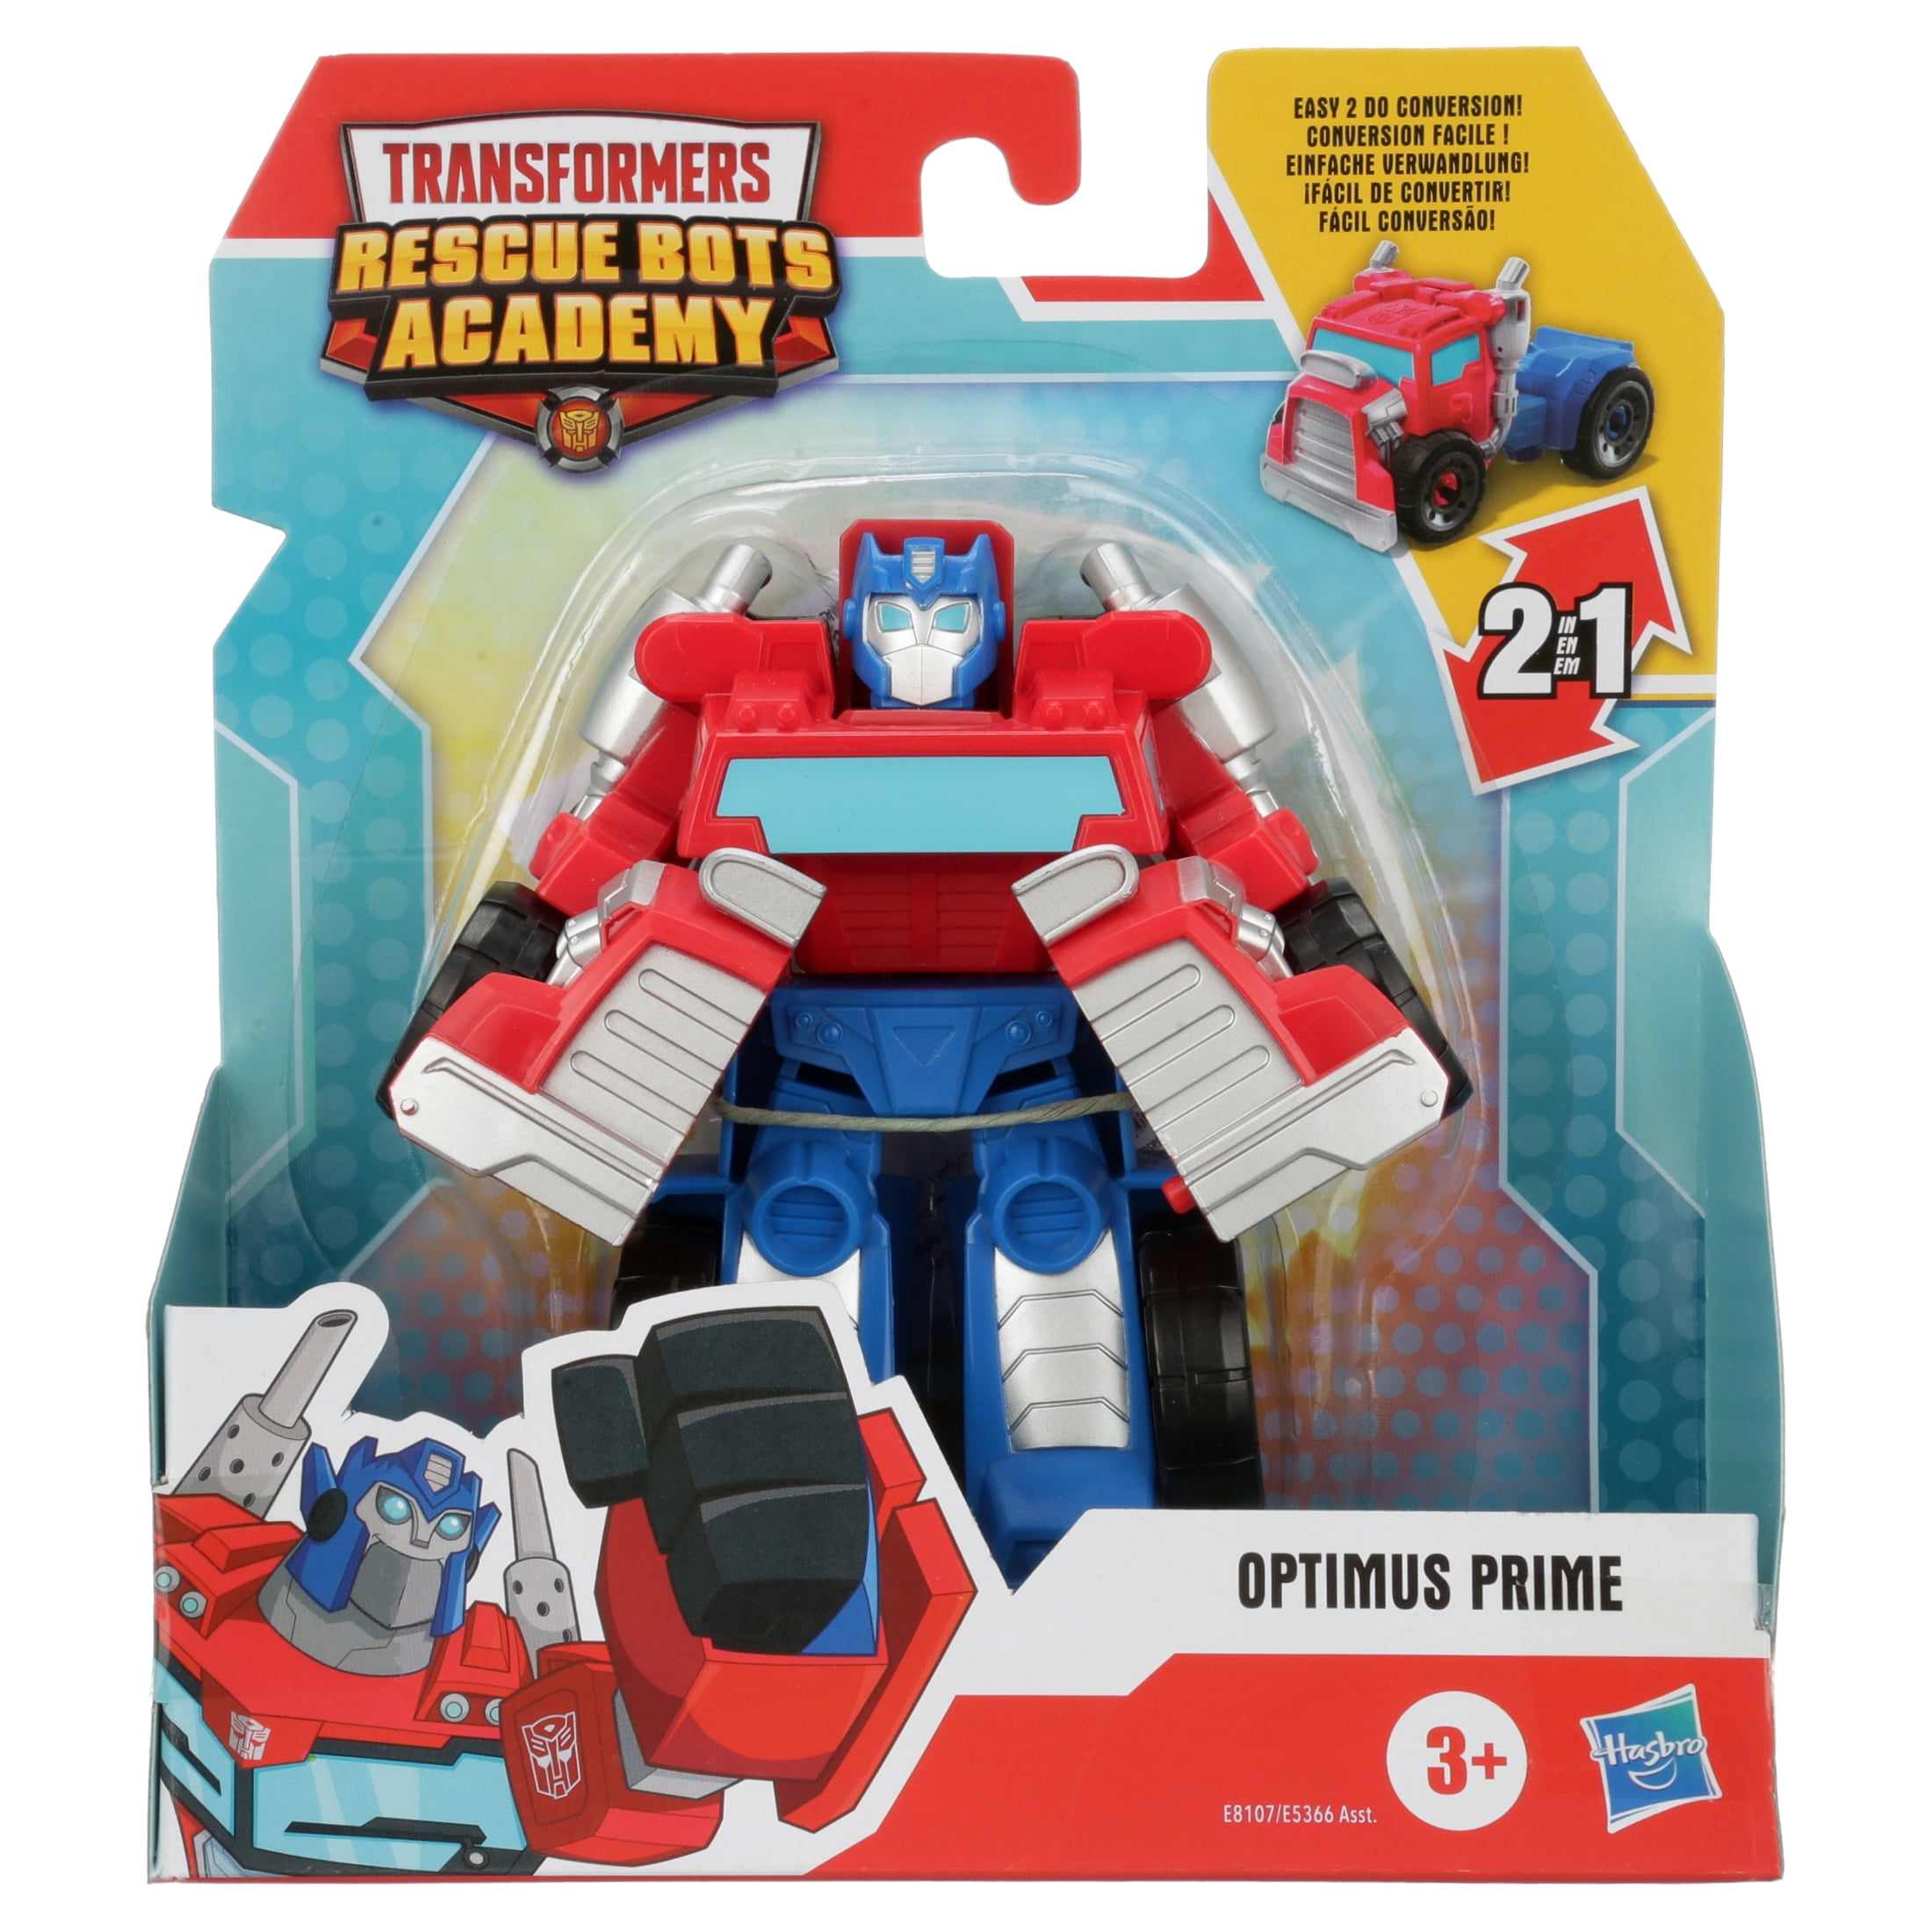 New TRANSFORMERS Rescue Bots BUMBLEBEE Robot Off Road Vehicle Playskool Academy 